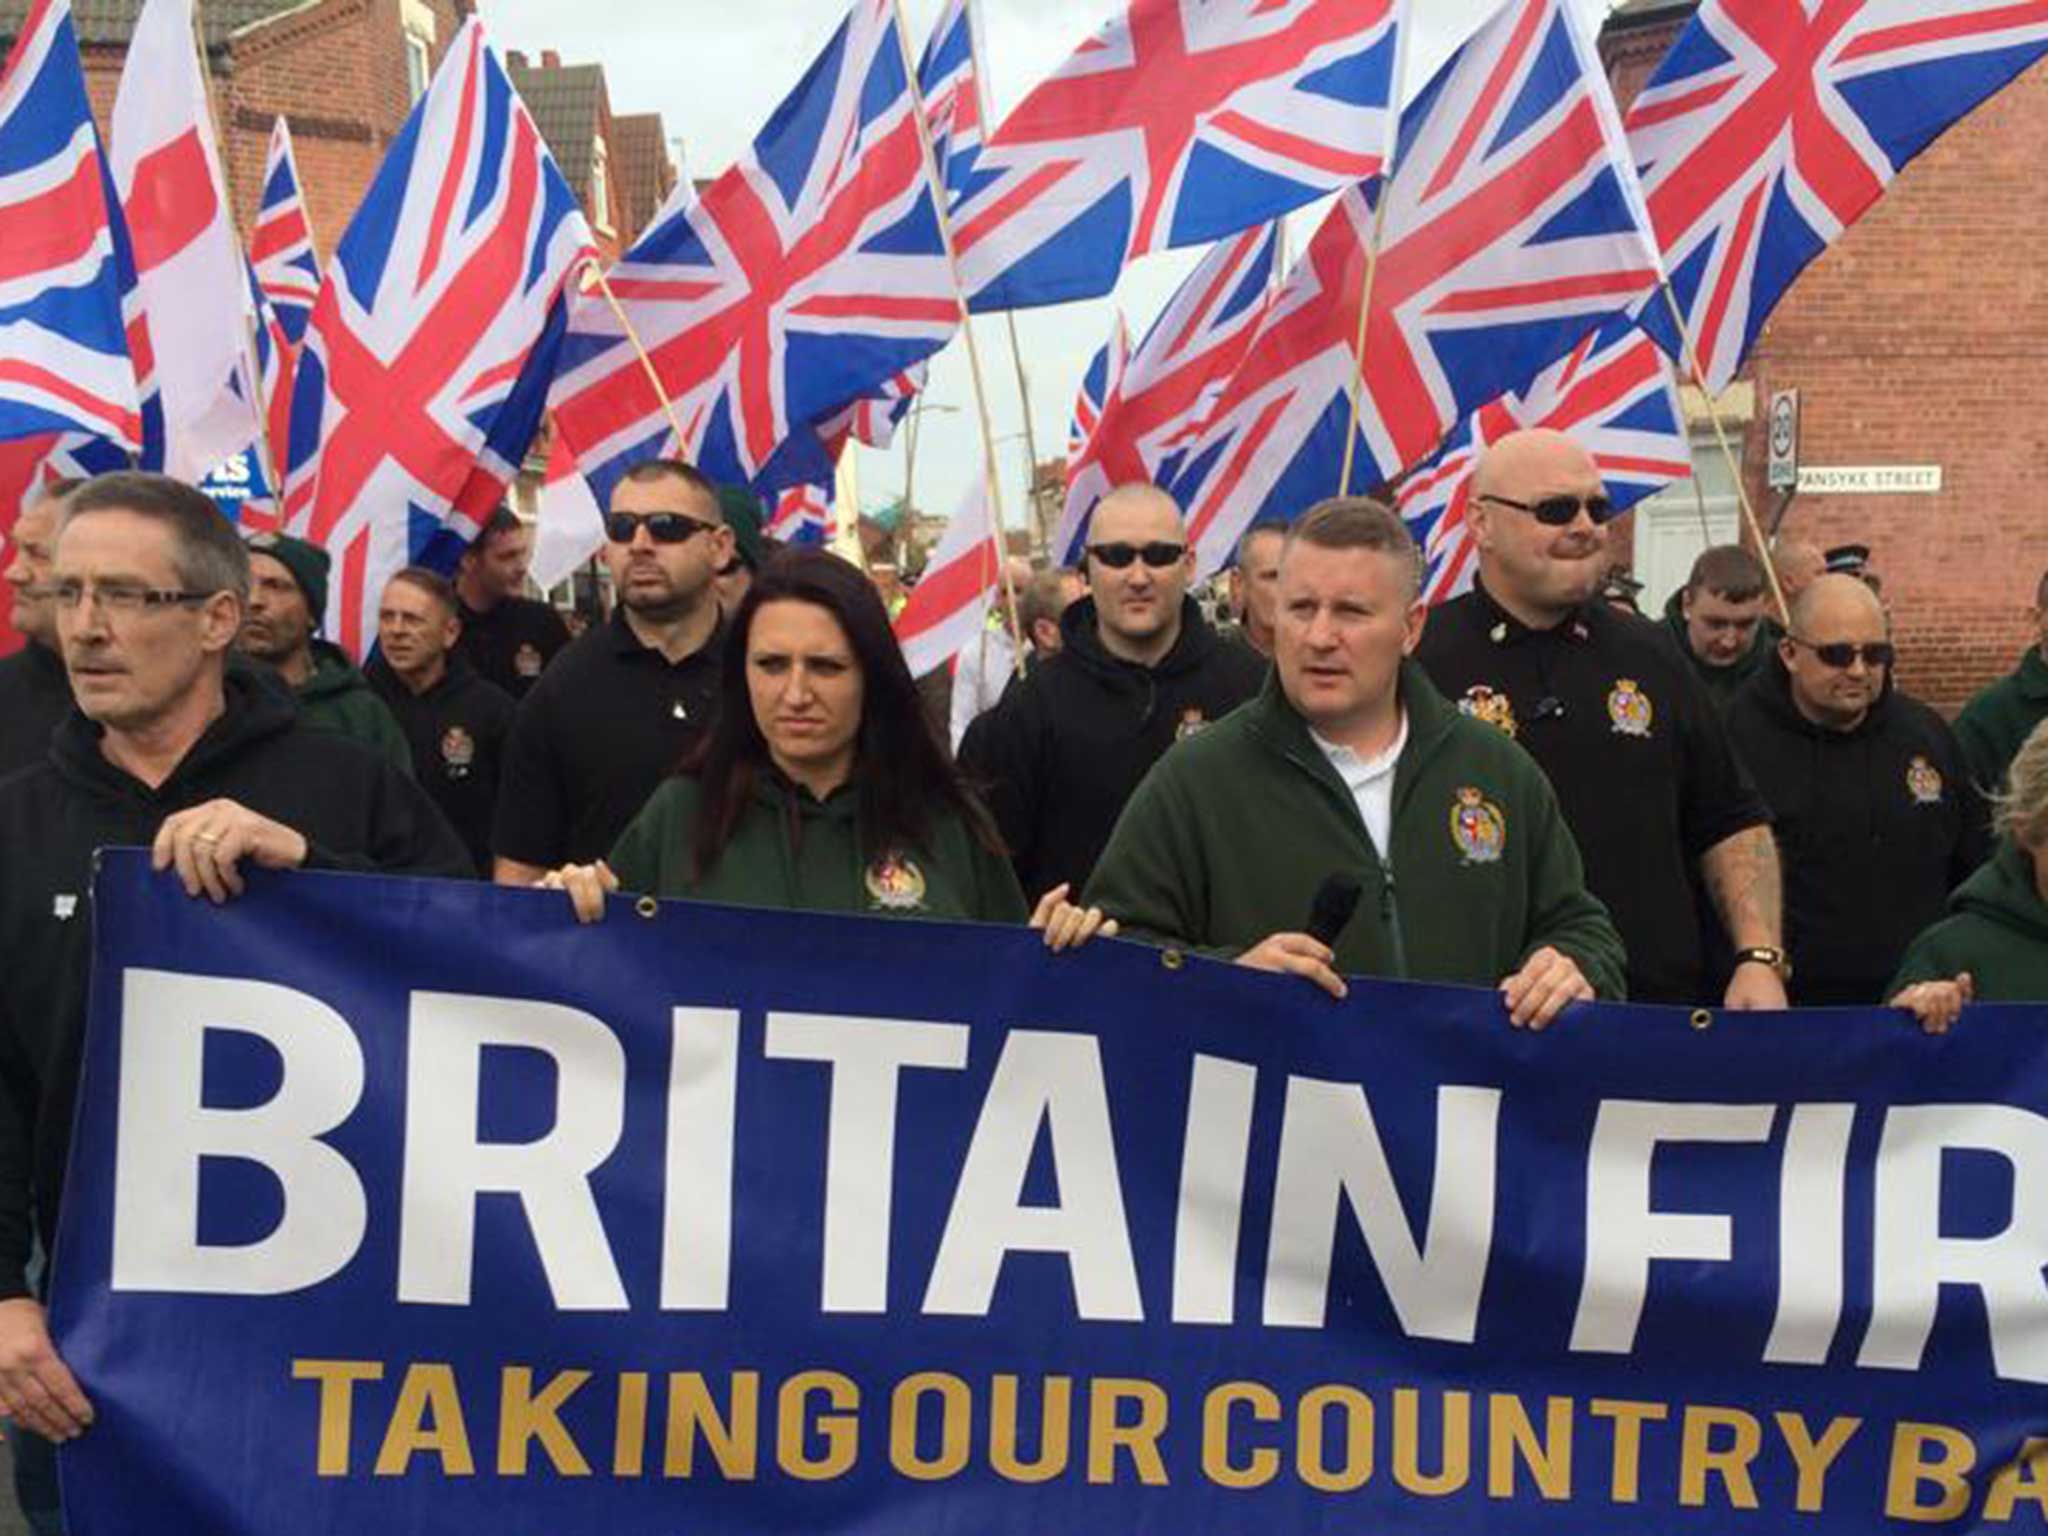 Britain First marching at a rally - leader Paul Golding can be seen at front